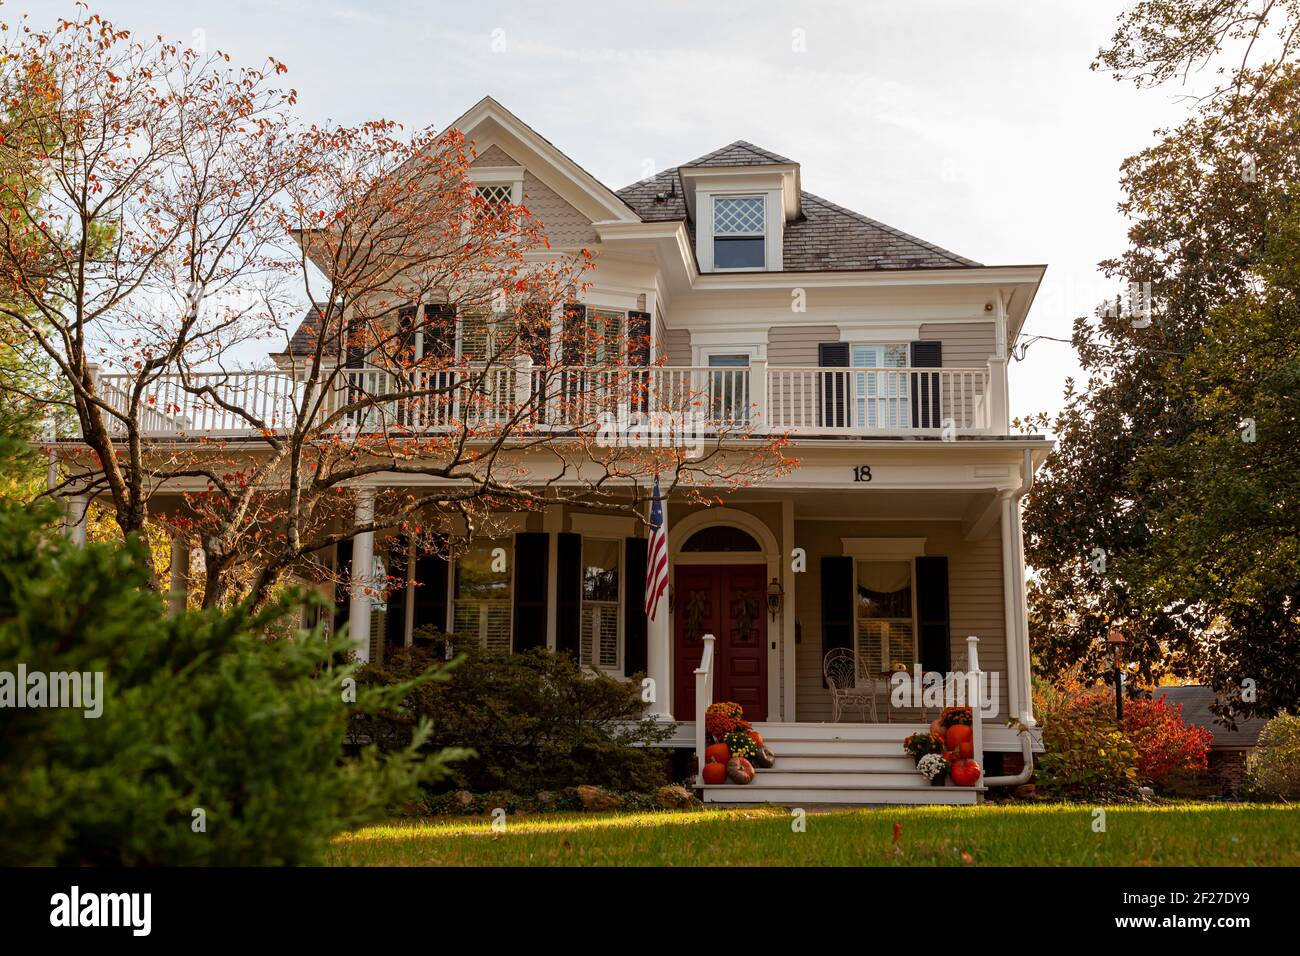 Rockville, MD, USA 11-01-2020: A two story wooden colonial era historic house in a well maintained garden in the historic district of Rockville. There Stock Photo